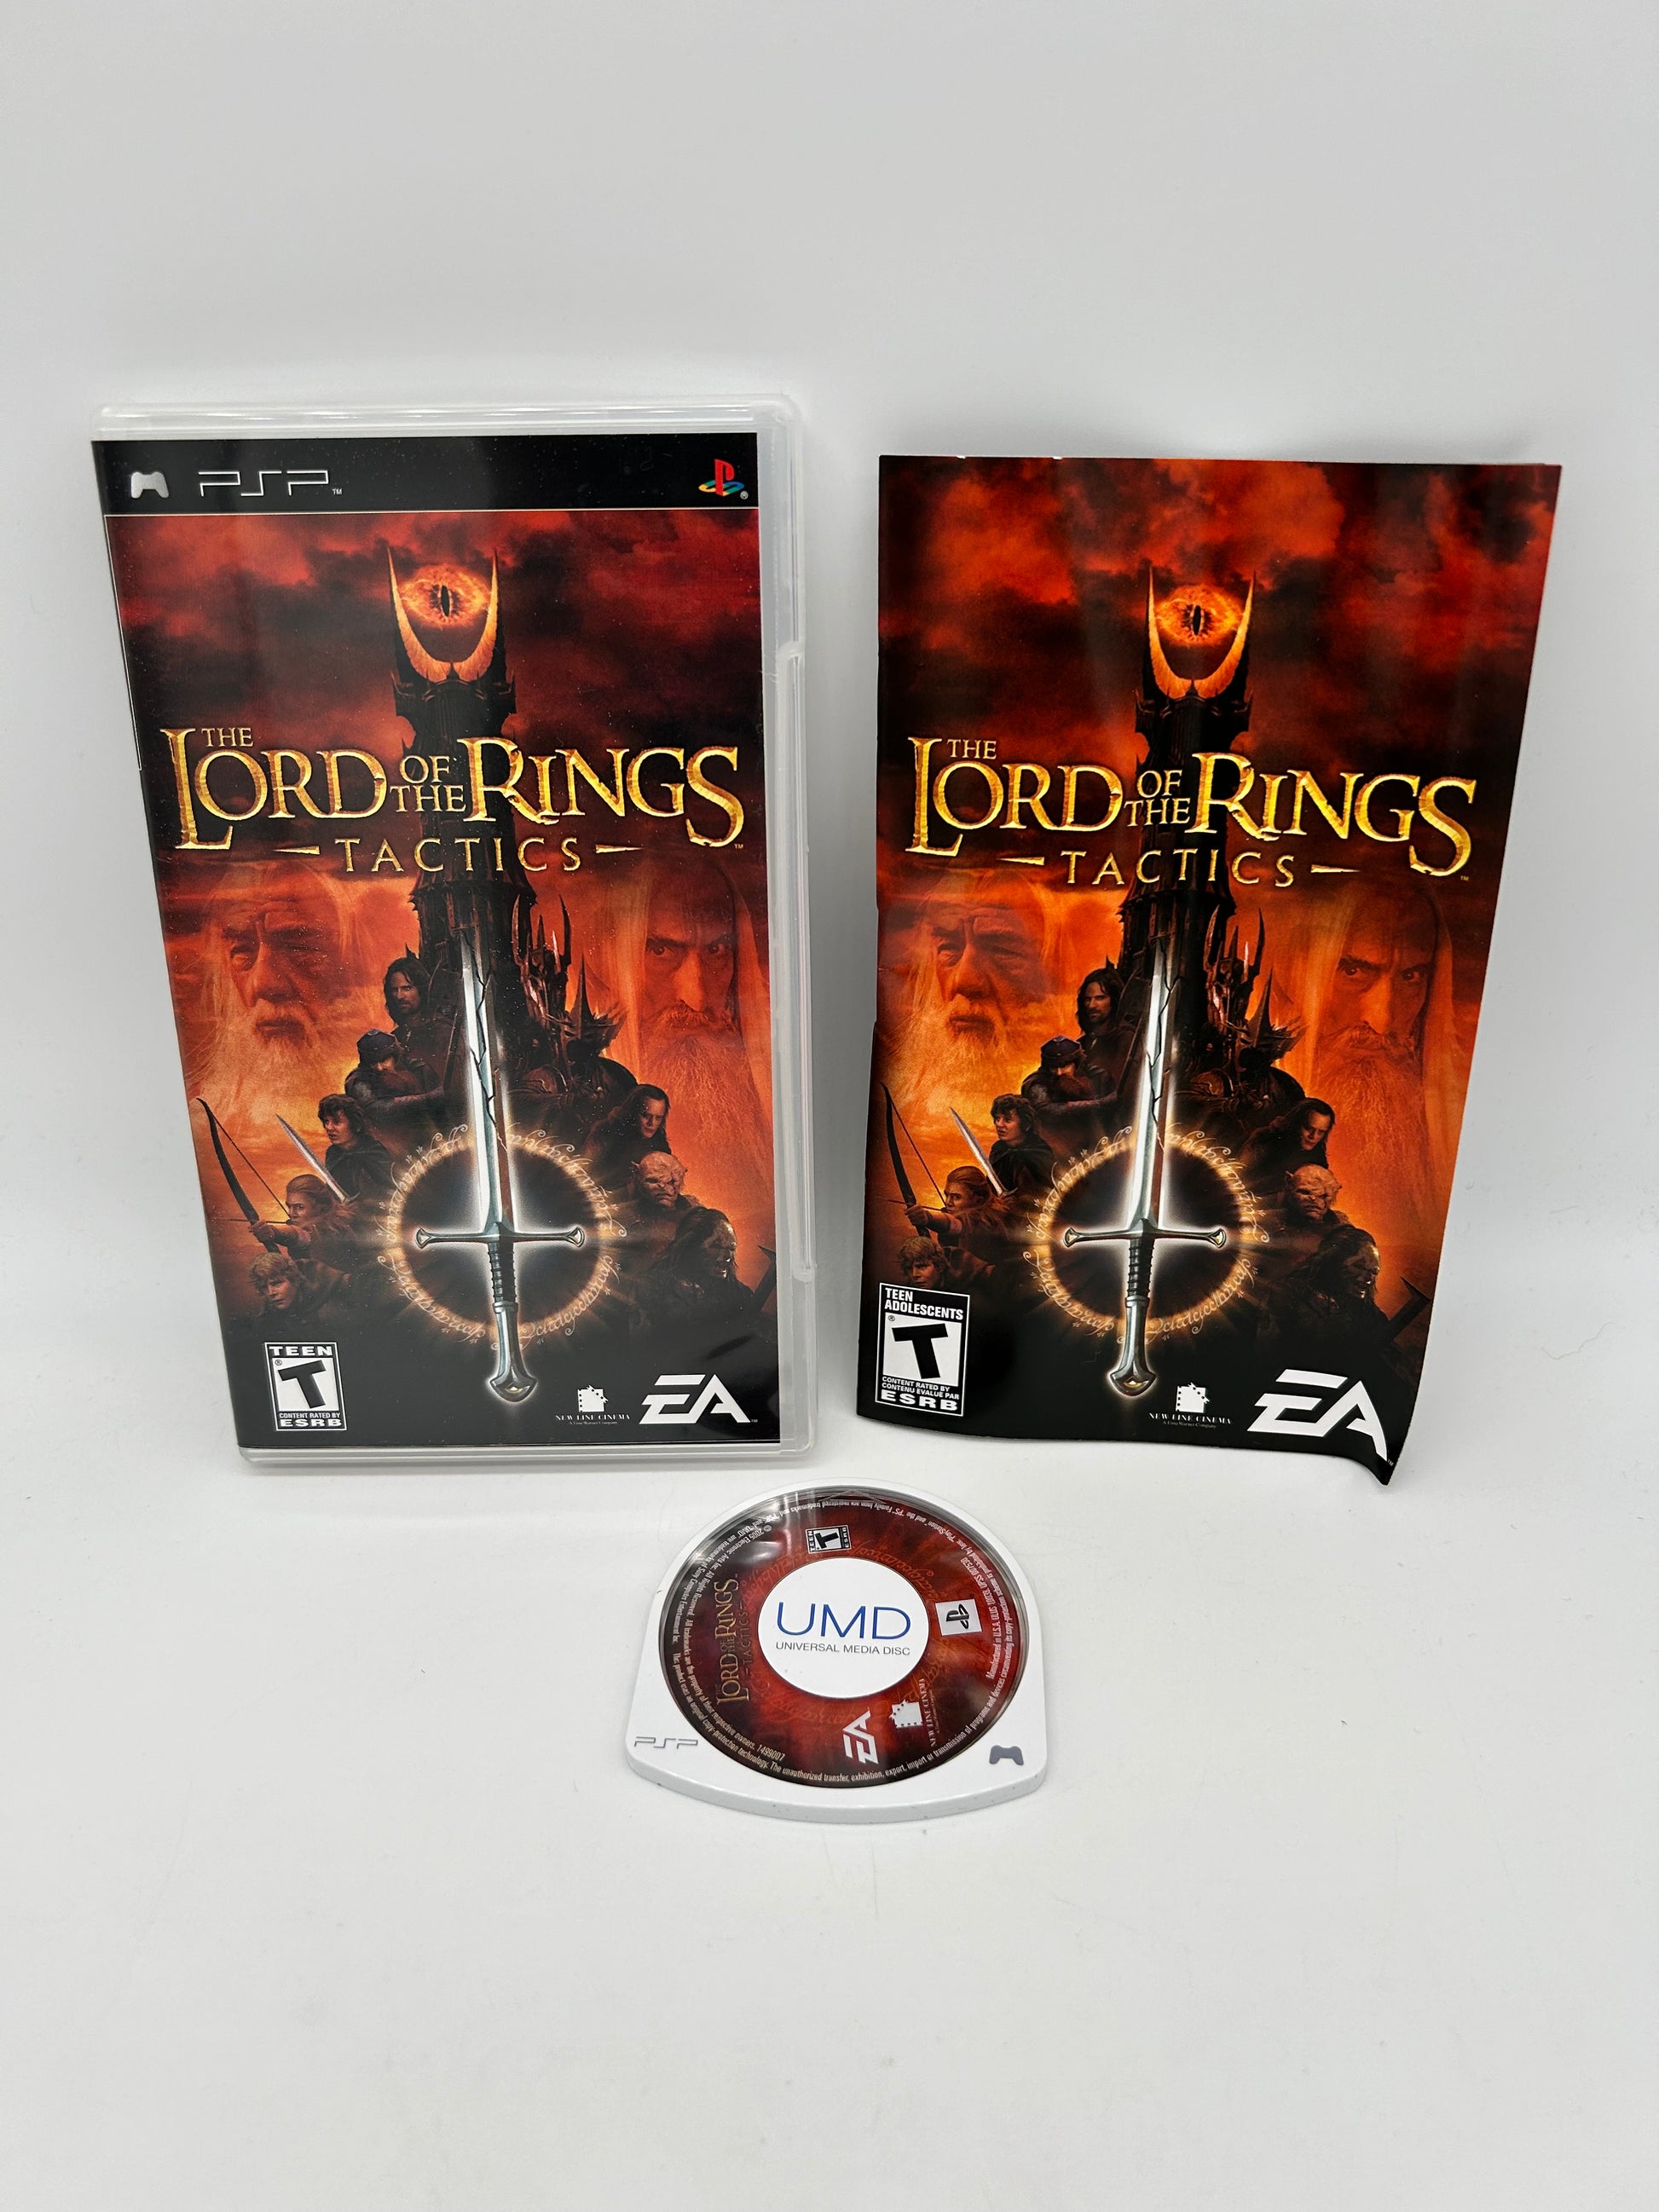 PiXEL-RETRO.COM : SONY PLAYSTATION PORTABLE (PSP) COMPLET CIB BOX MAAL GAME NTSC THE LORD OF THE RINGS TACTICS